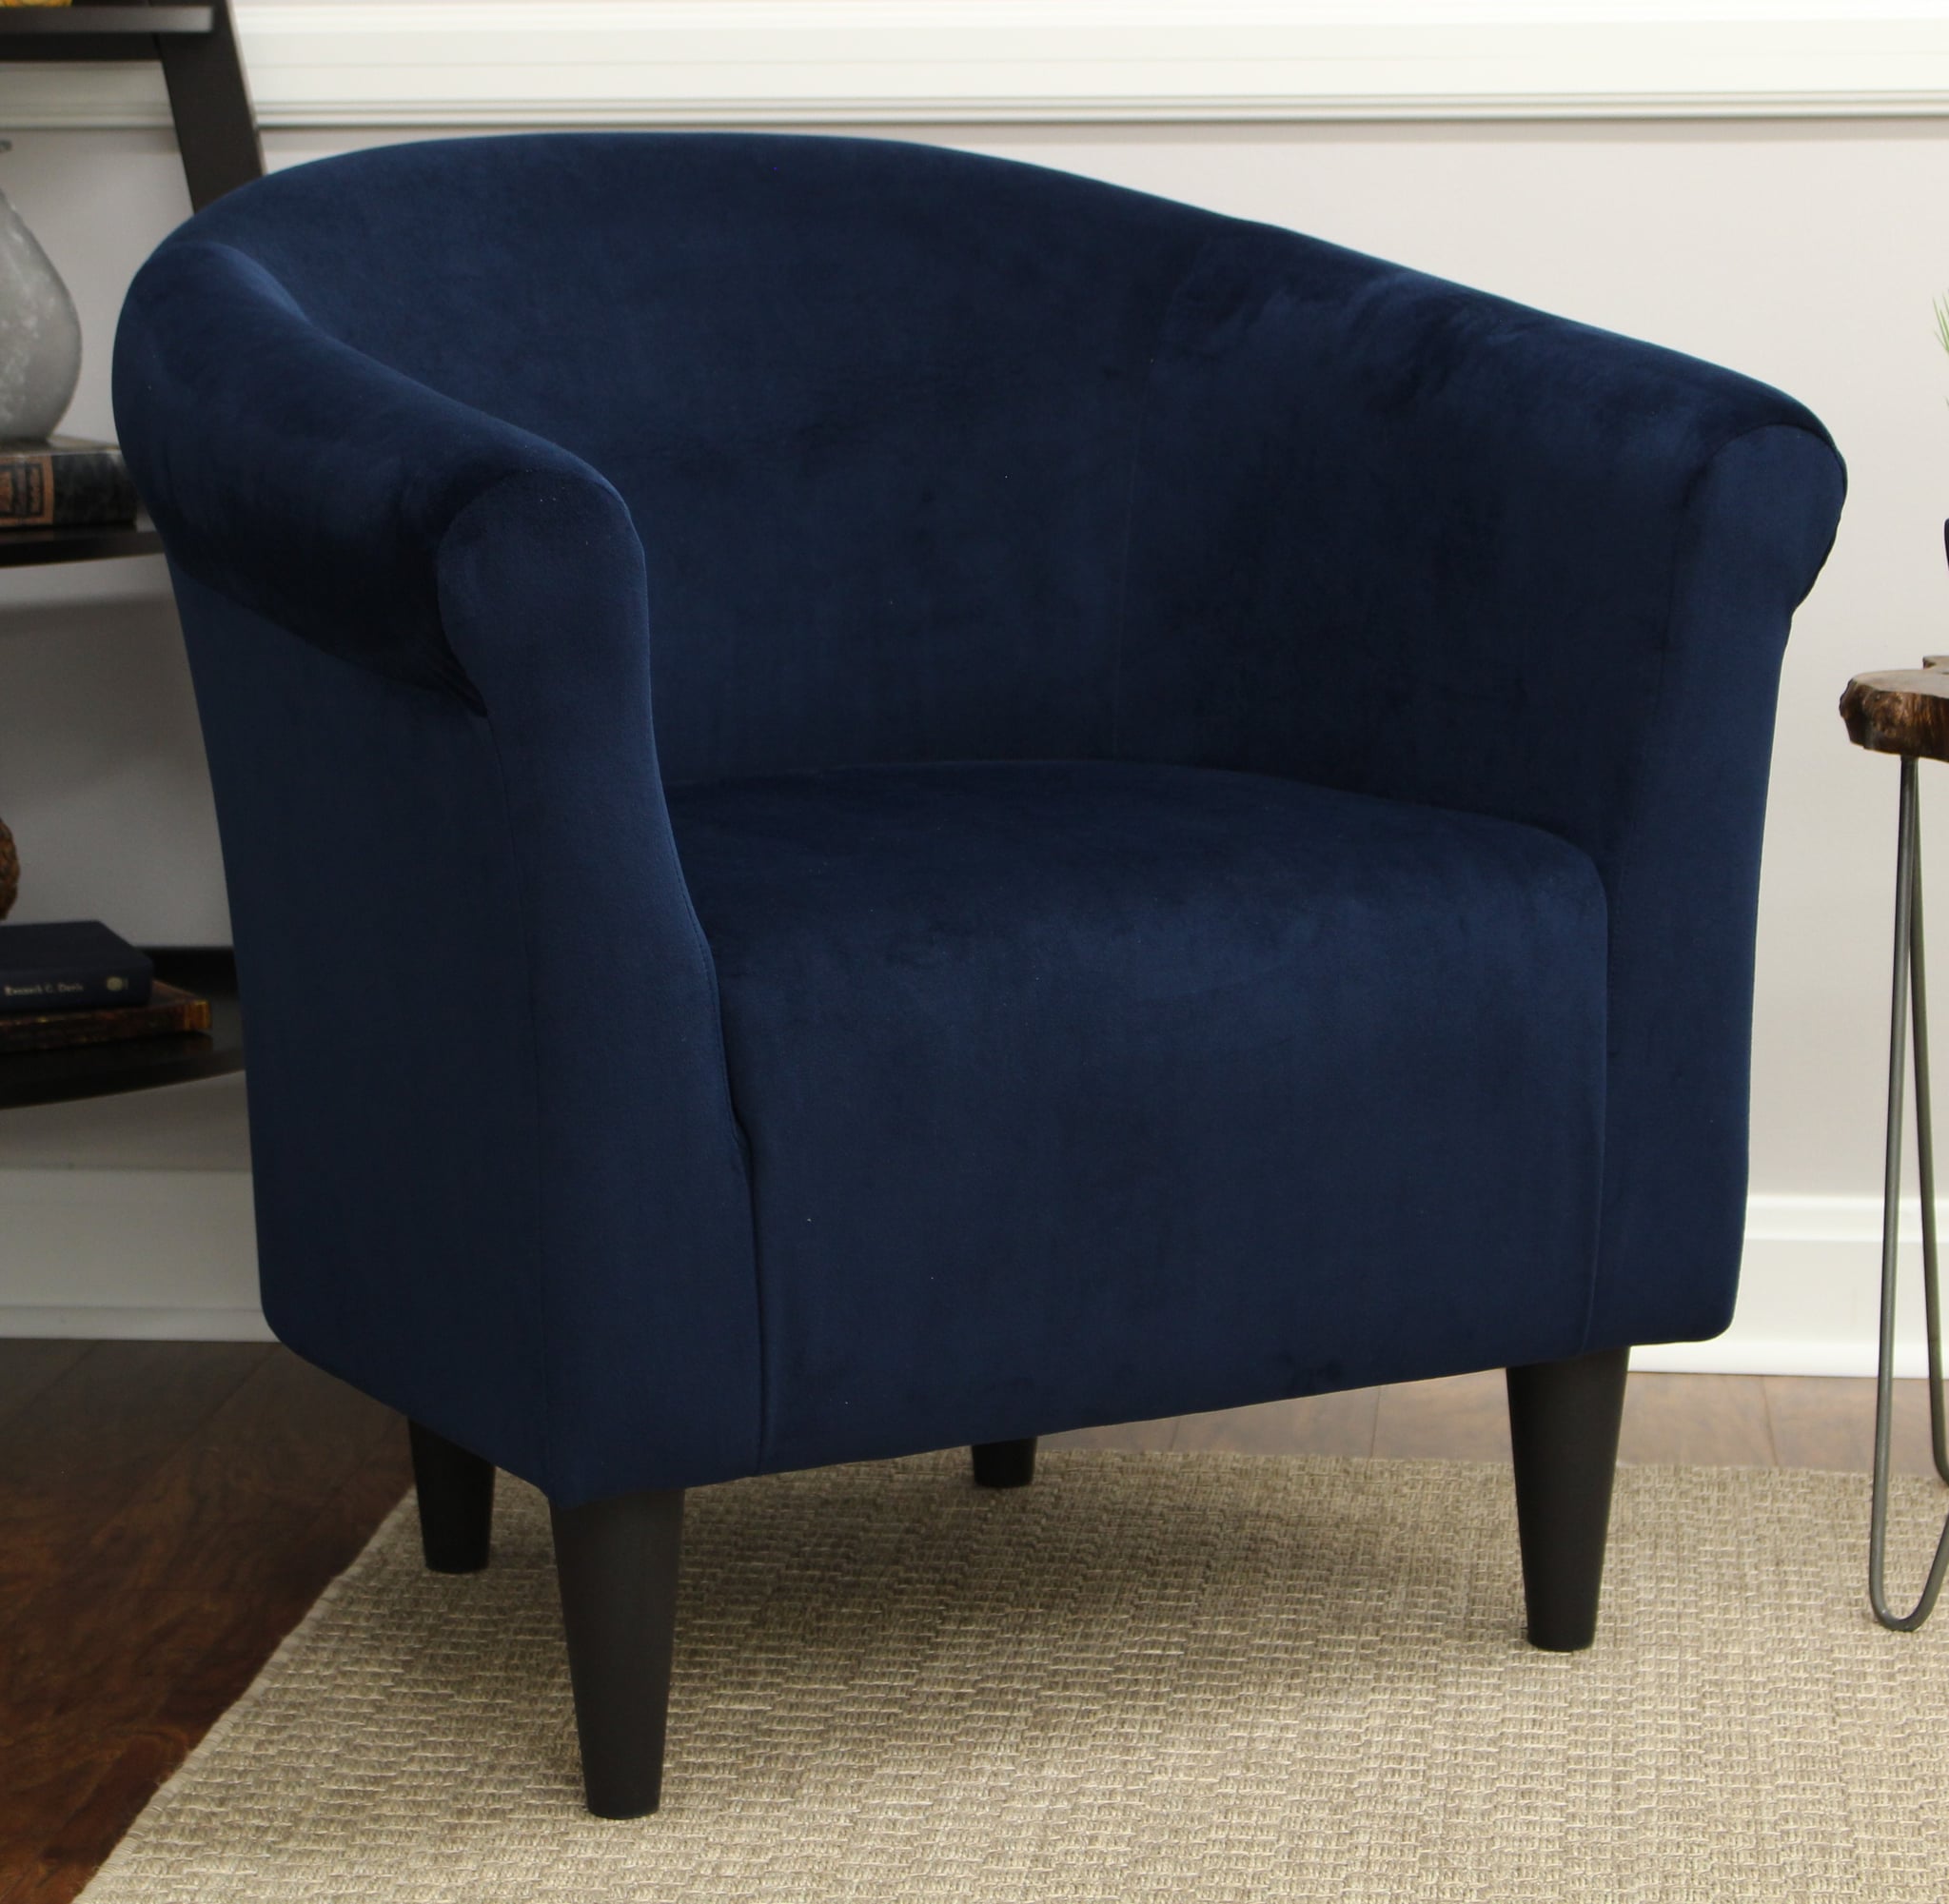 Mainstays Microfibre Bucket Accent Chair The Best Cosy Products You Can Get For Under 100 In 2019 POPSUGAR Australia Smart Living Photo 58